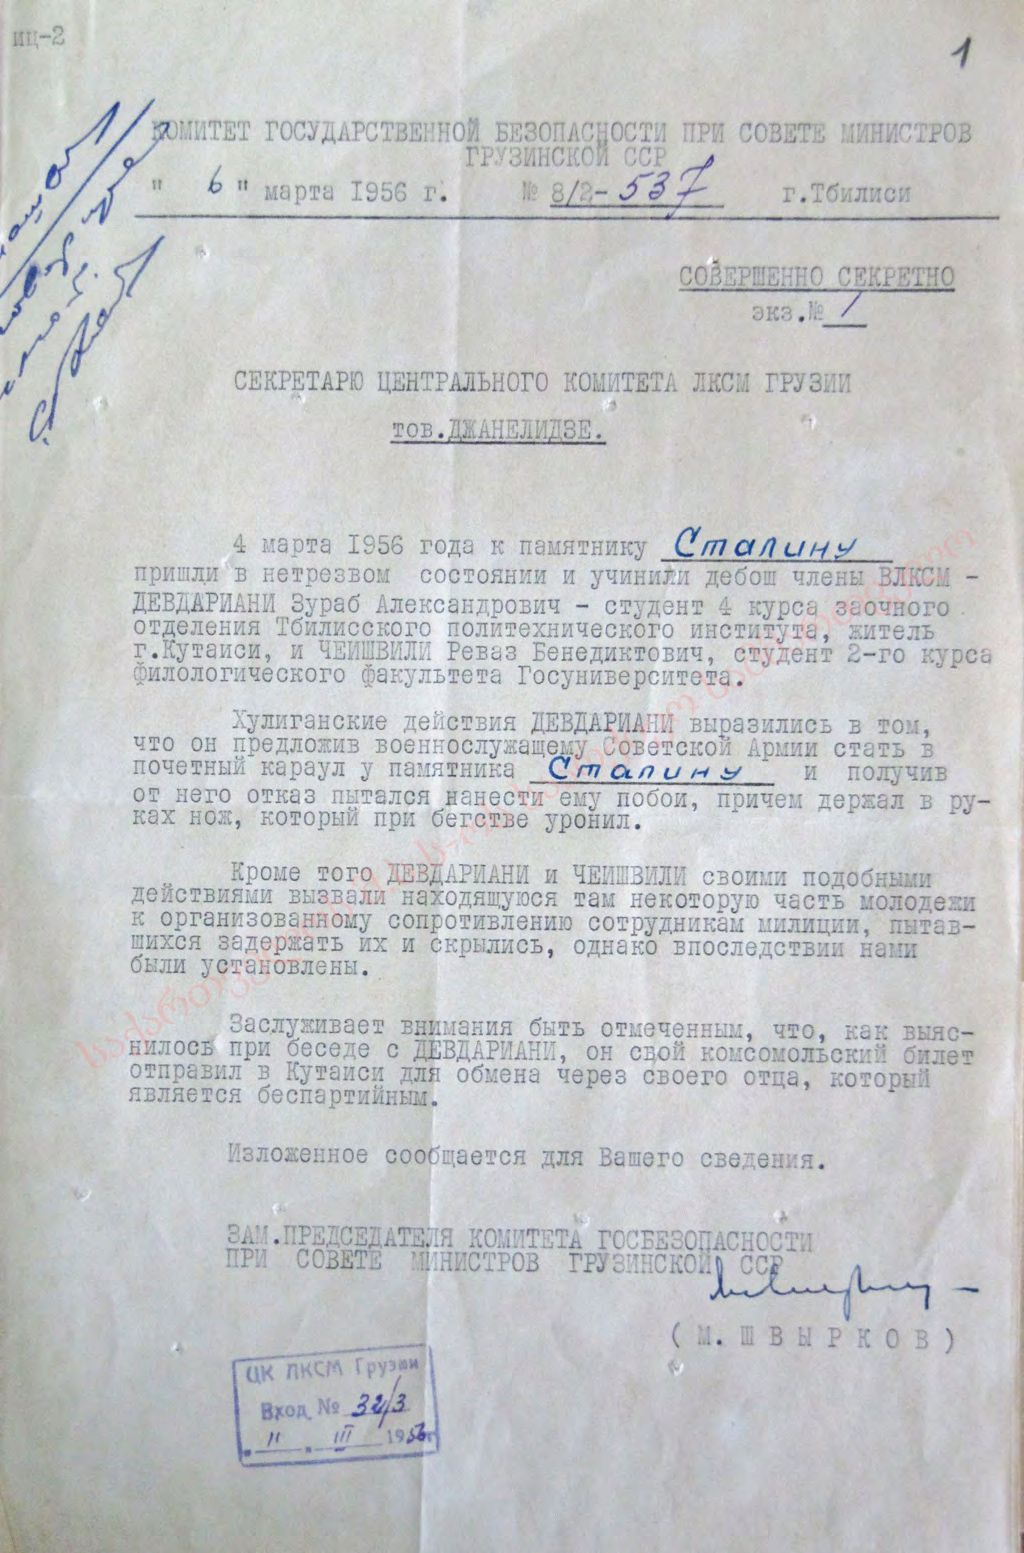 Participation of Komsomol members in the events of March 5-9, 1956